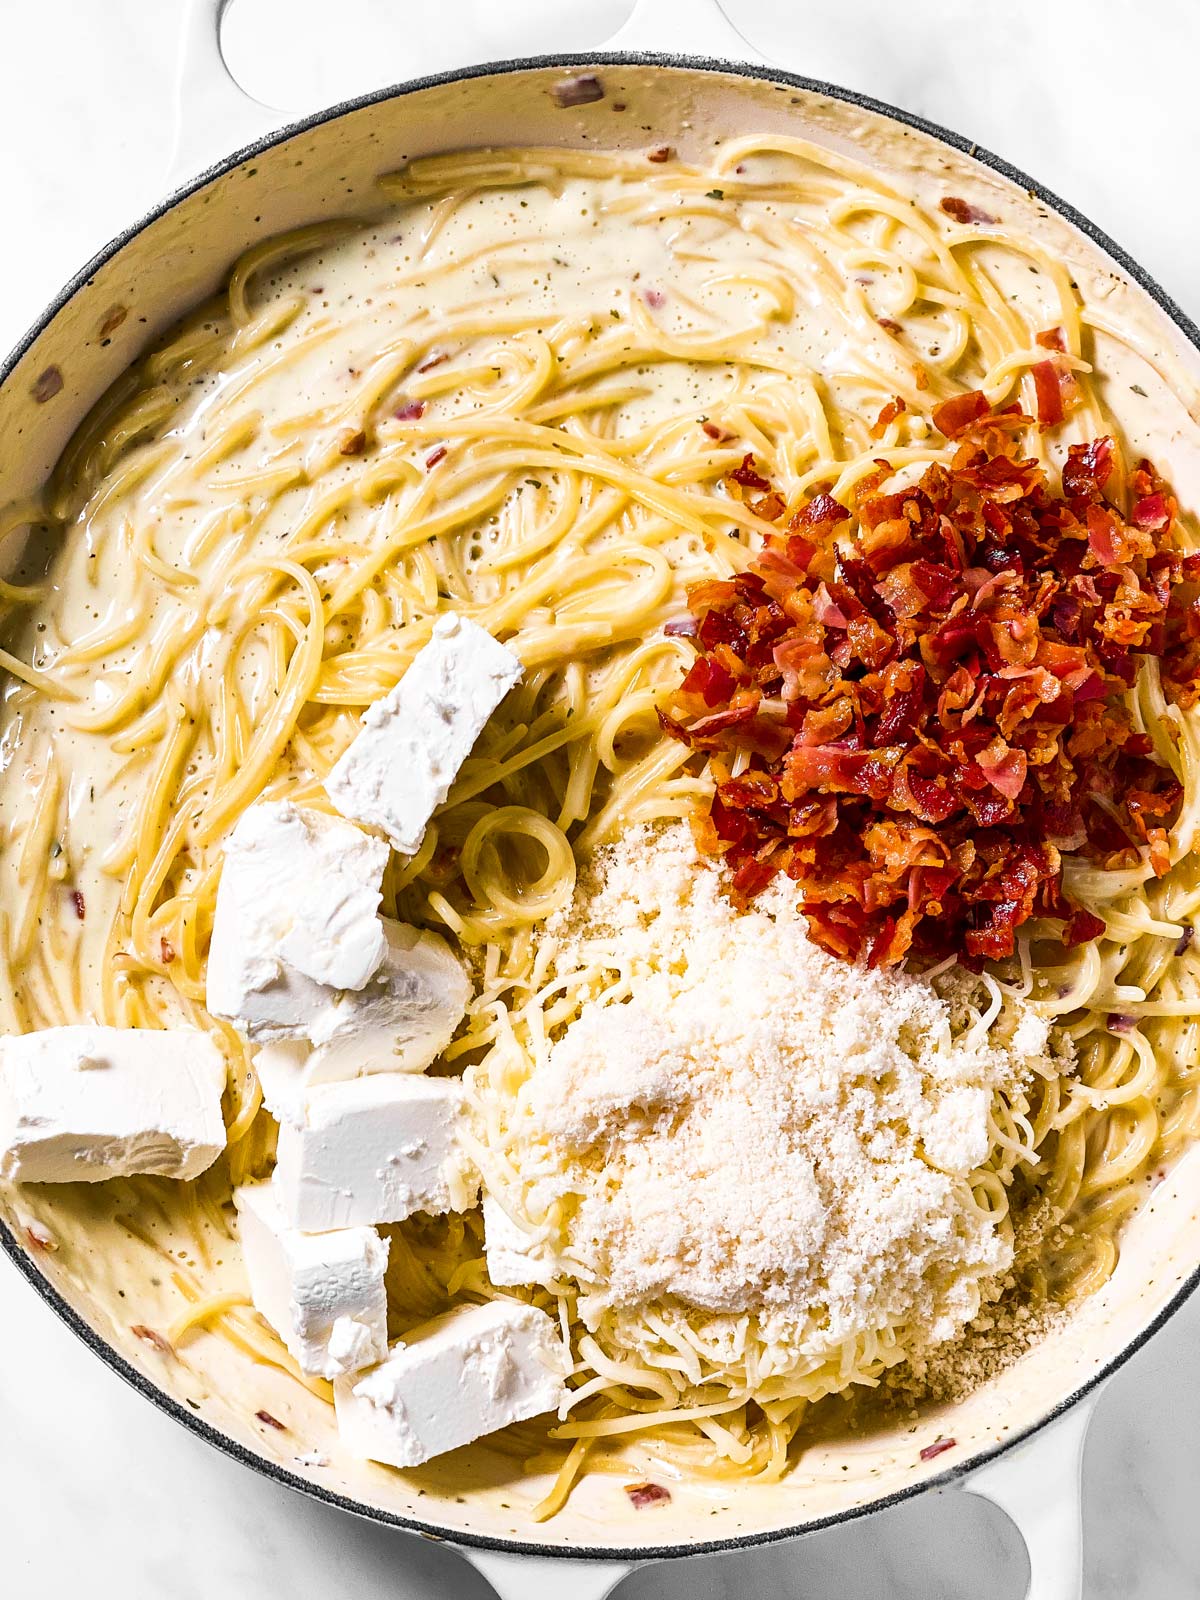 diced cream cheese, crumbled bacon and parmesan cheese on top of creamy spaghetti in sauté pan